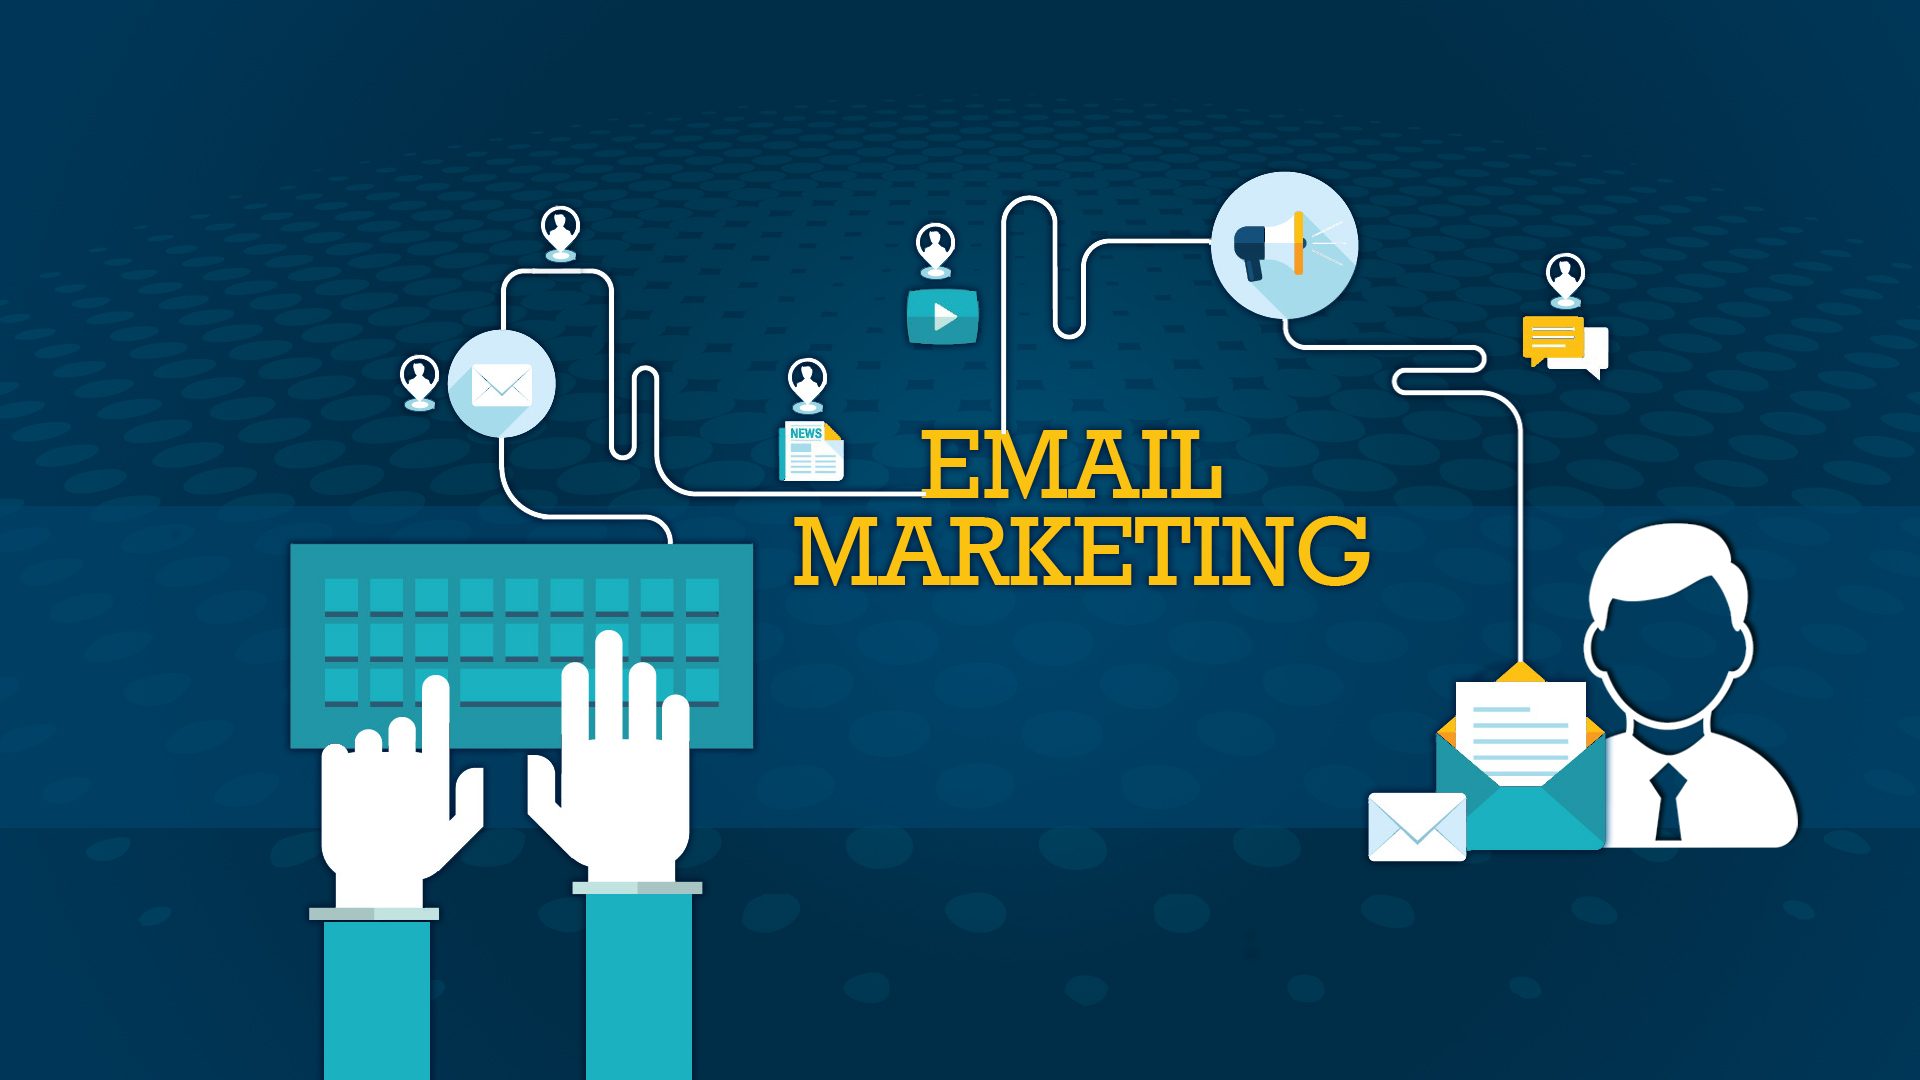 Successful Email Marketing Requires Optimized Email Campaign Management